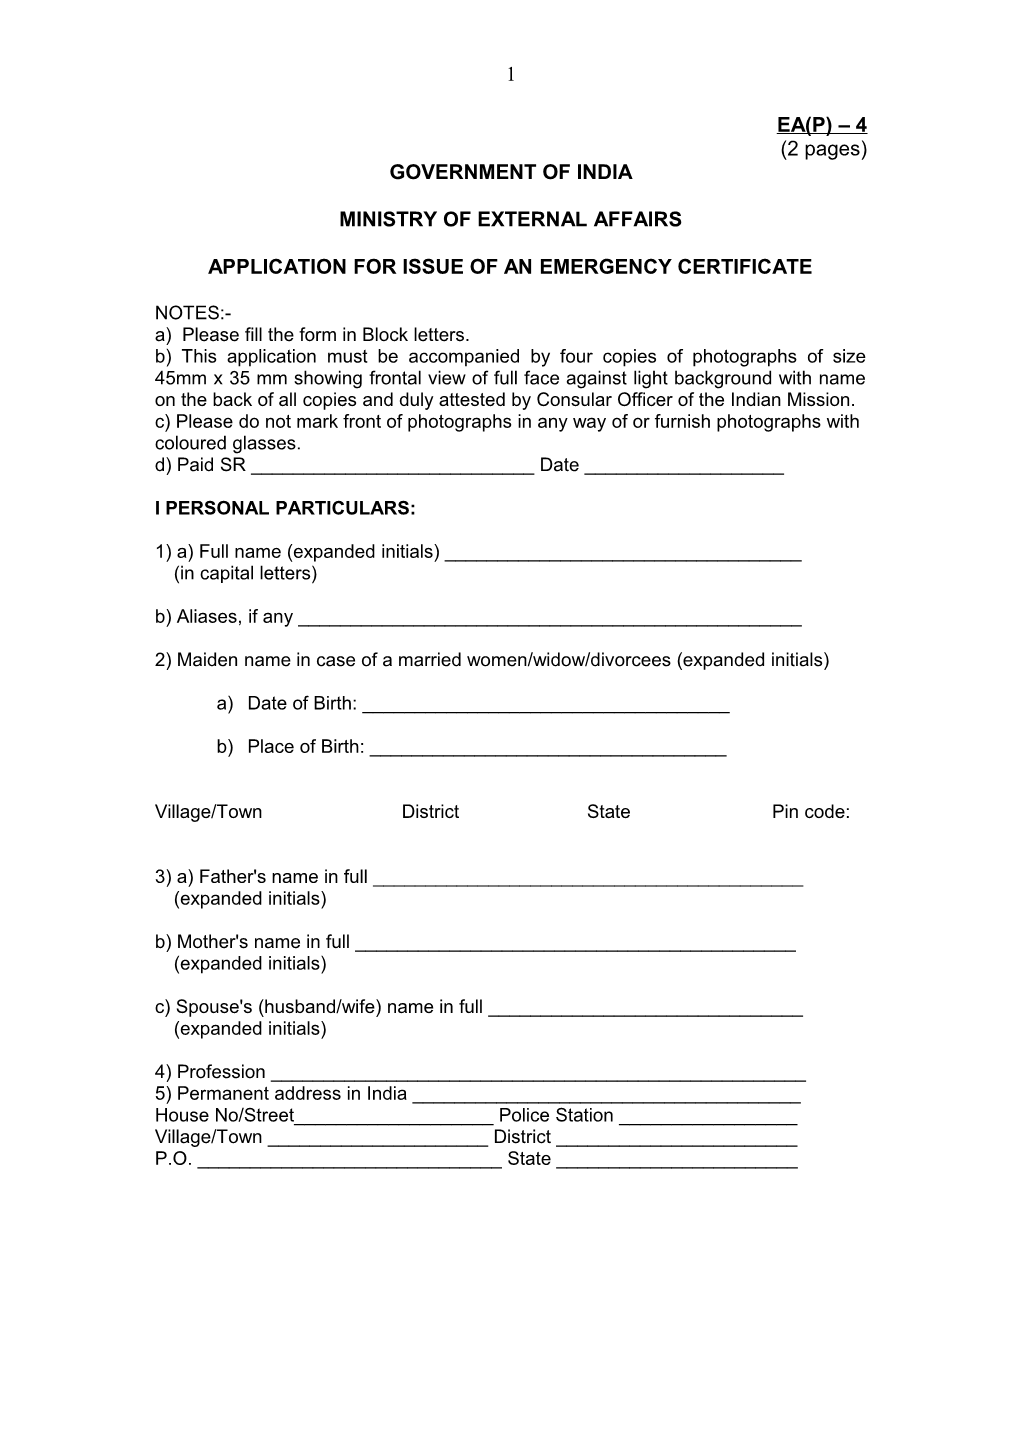 Application for Issue of an Emergency Certificate